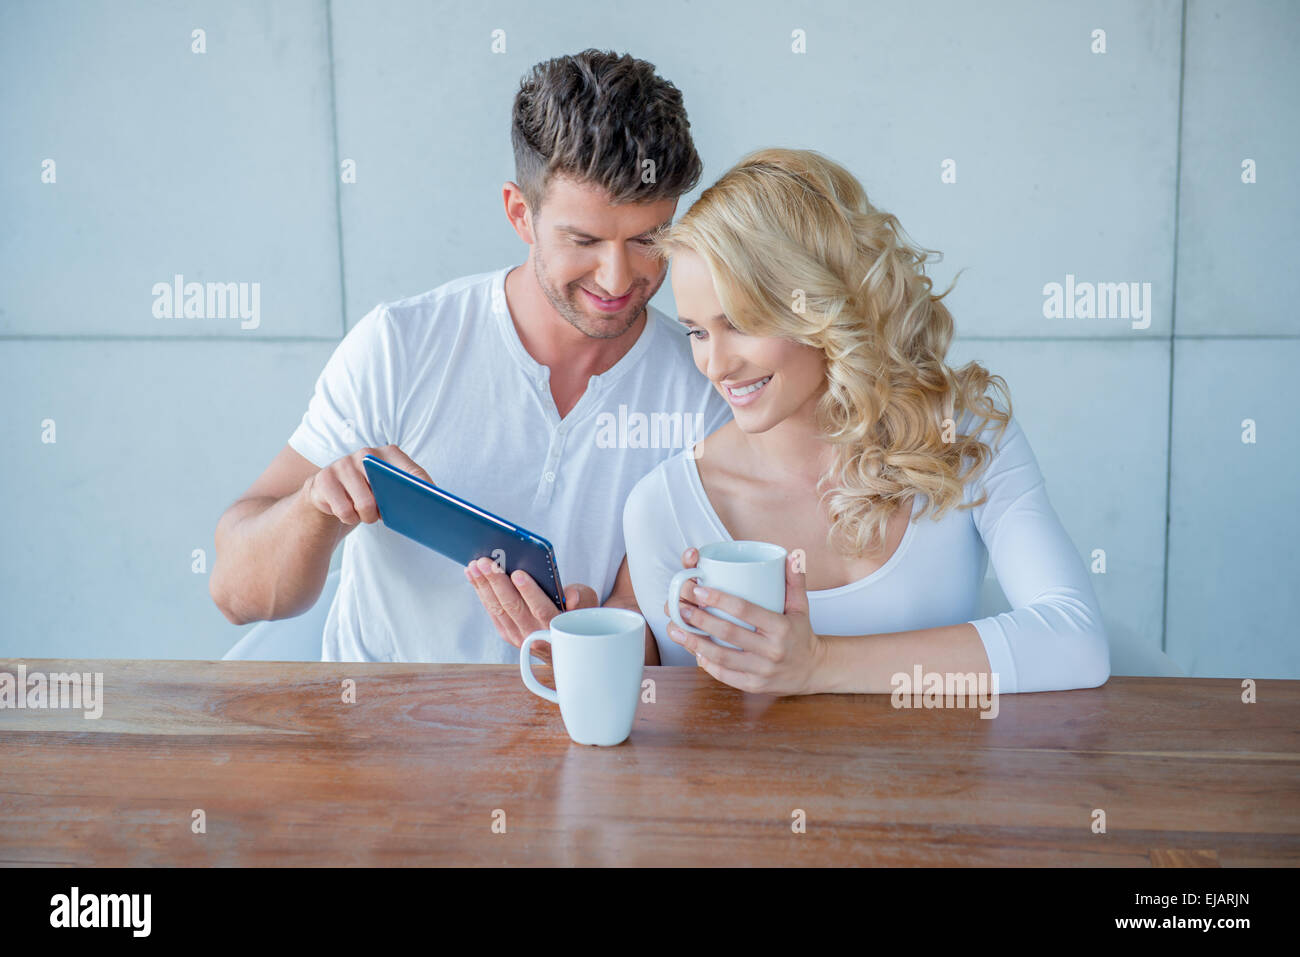 Man showing his wife something on a tablet Stock Photo